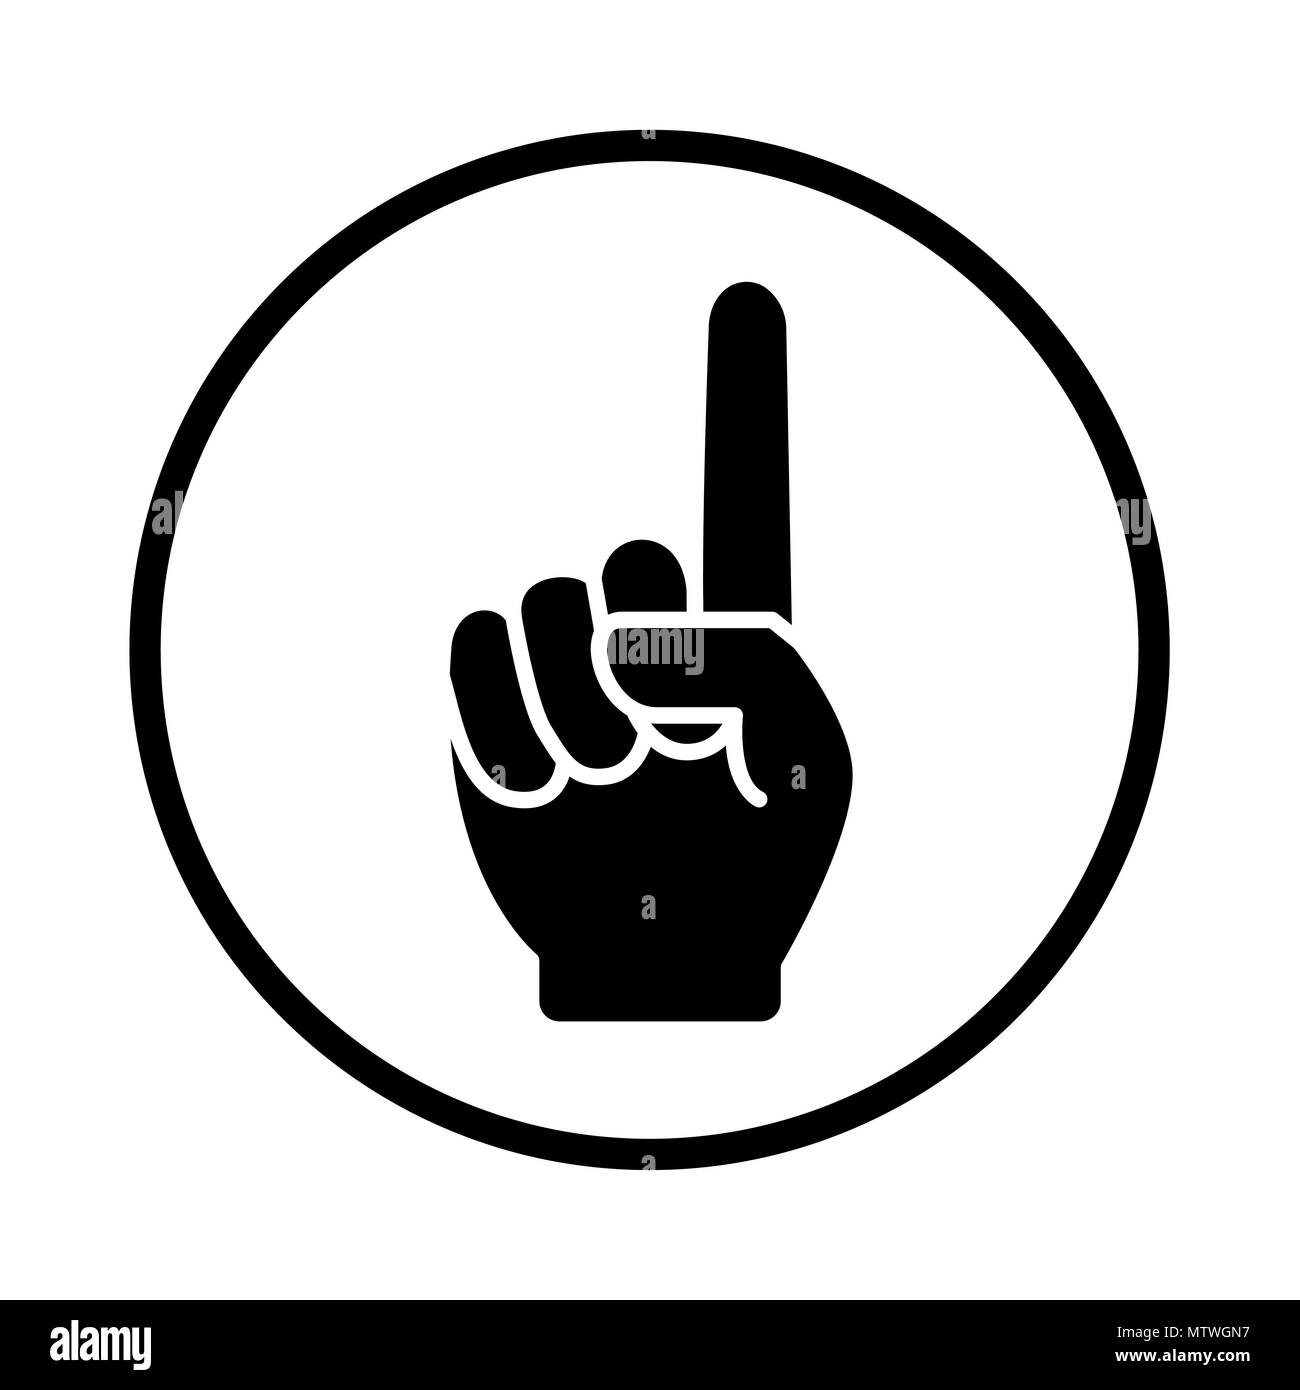 One finger line art icon in Circle, Hand showing number one symbol, hand gesture with a raised index finger - Vector iconic design Stock Vector